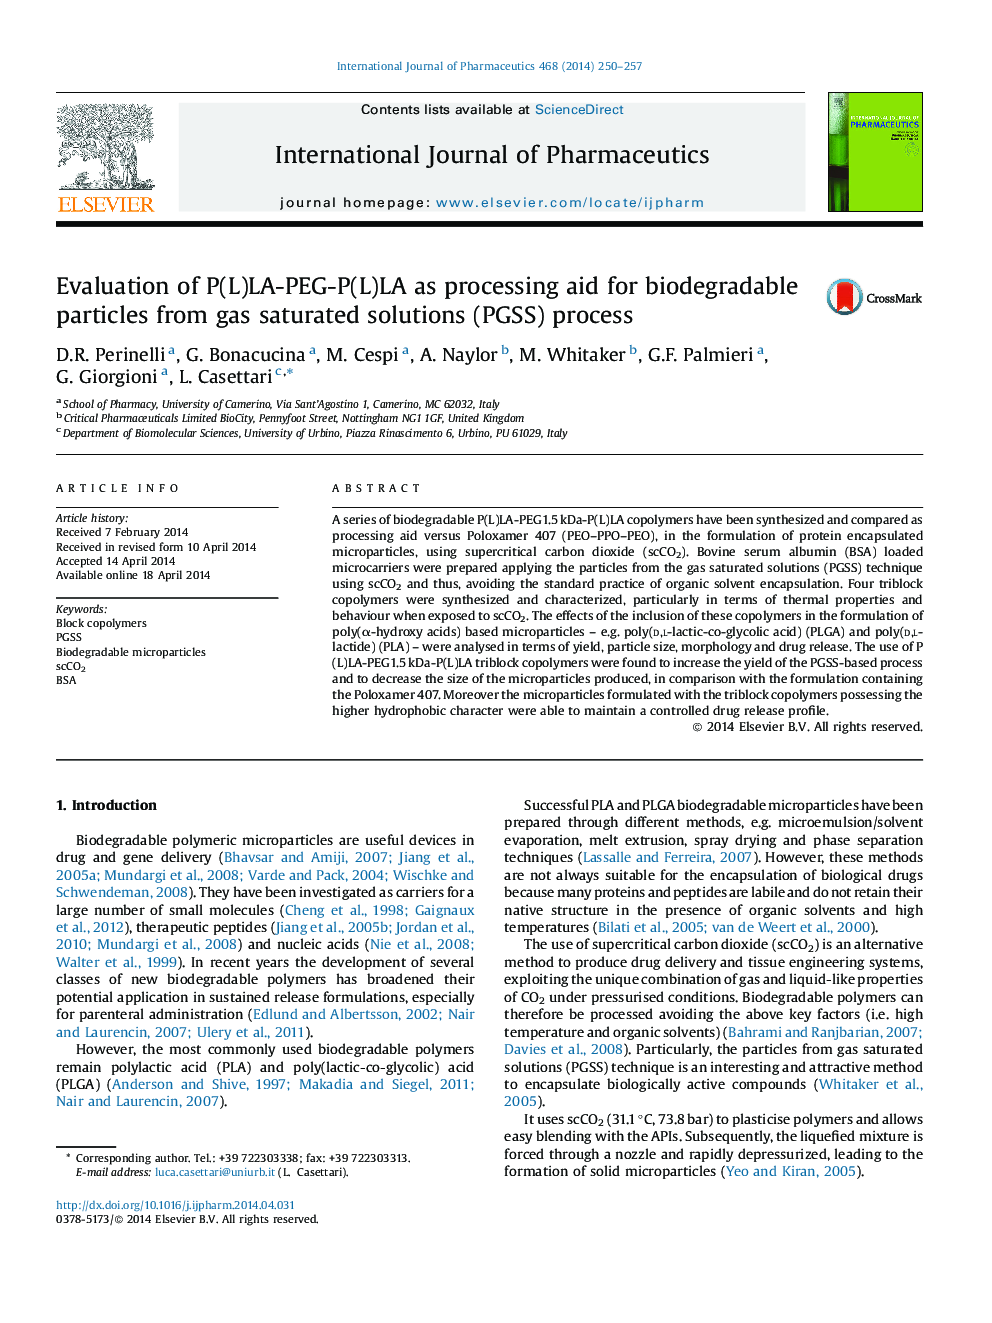 Evaluation of P(L)LA-PEG-P(L)LA as processing aid for biodegradable particles from gas saturated solutions (PGSS) process